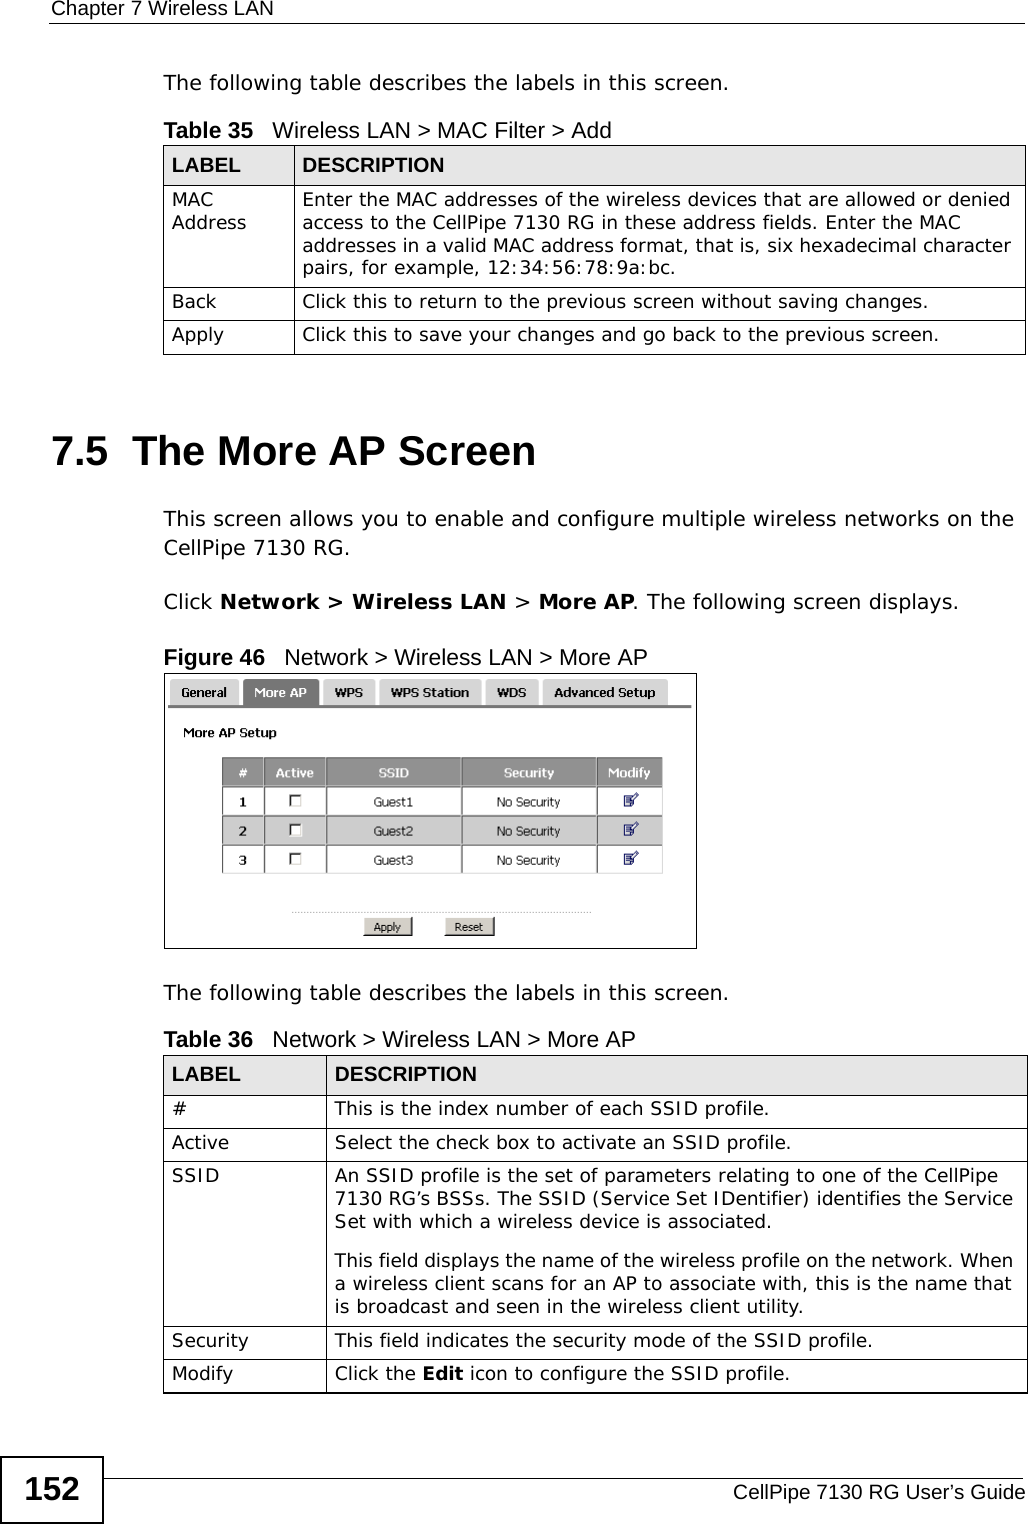 Chapter 7 Wireless LANCellPipe 7130 RG User’s Guide152The following table describes the labels in this screen.7.5  The More AP Screen This screen allows you to enable and configure multiple wireless networks on the CellPipe 7130 RG.Click Network &gt; Wireless LAN &gt; More AP. The following screen displays.Figure 46   Network &gt; Wireless LAN &gt; More APThe following table describes the labels in this screen.Table 35   Wireless LAN &gt; MAC Filter &gt; AddLABEL DESCRIPTIONMAC Address Enter the MAC addresses of the wireless devices that are allowed or denied access to the CellPipe 7130 RG in these address fields. Enter the MAC addresses in a valid MAC address format, that is, six hexadecimal character pairs, for example, 12:34:56:78:9a:bc.Back Click this to return to the previous screen without saving changes.Apply Click this to save your changes and go back to the previous screen.Table 36   Network &gt; Wireless LAN &gt; More APLABEL DESCRIPTION# This is the index number of each SSID profile. Active Select the check box to activate an SSID profile.SSID An SSID profile is the set of parameters relating to one of the CellPipe 7130 RG’s BSSs. The SSID (Service Set IDentifier) identifies the Service Set with which a wireless device is associated. This field displays the name of the wireless profile on the network. When a wireless client scans for an AP to associate with, this is the name that is broadcast and seen in the wireless client utility.Security This field indicates the security mode of the SSID profile.Modify Click the Edit icon to configure the SSID profile.